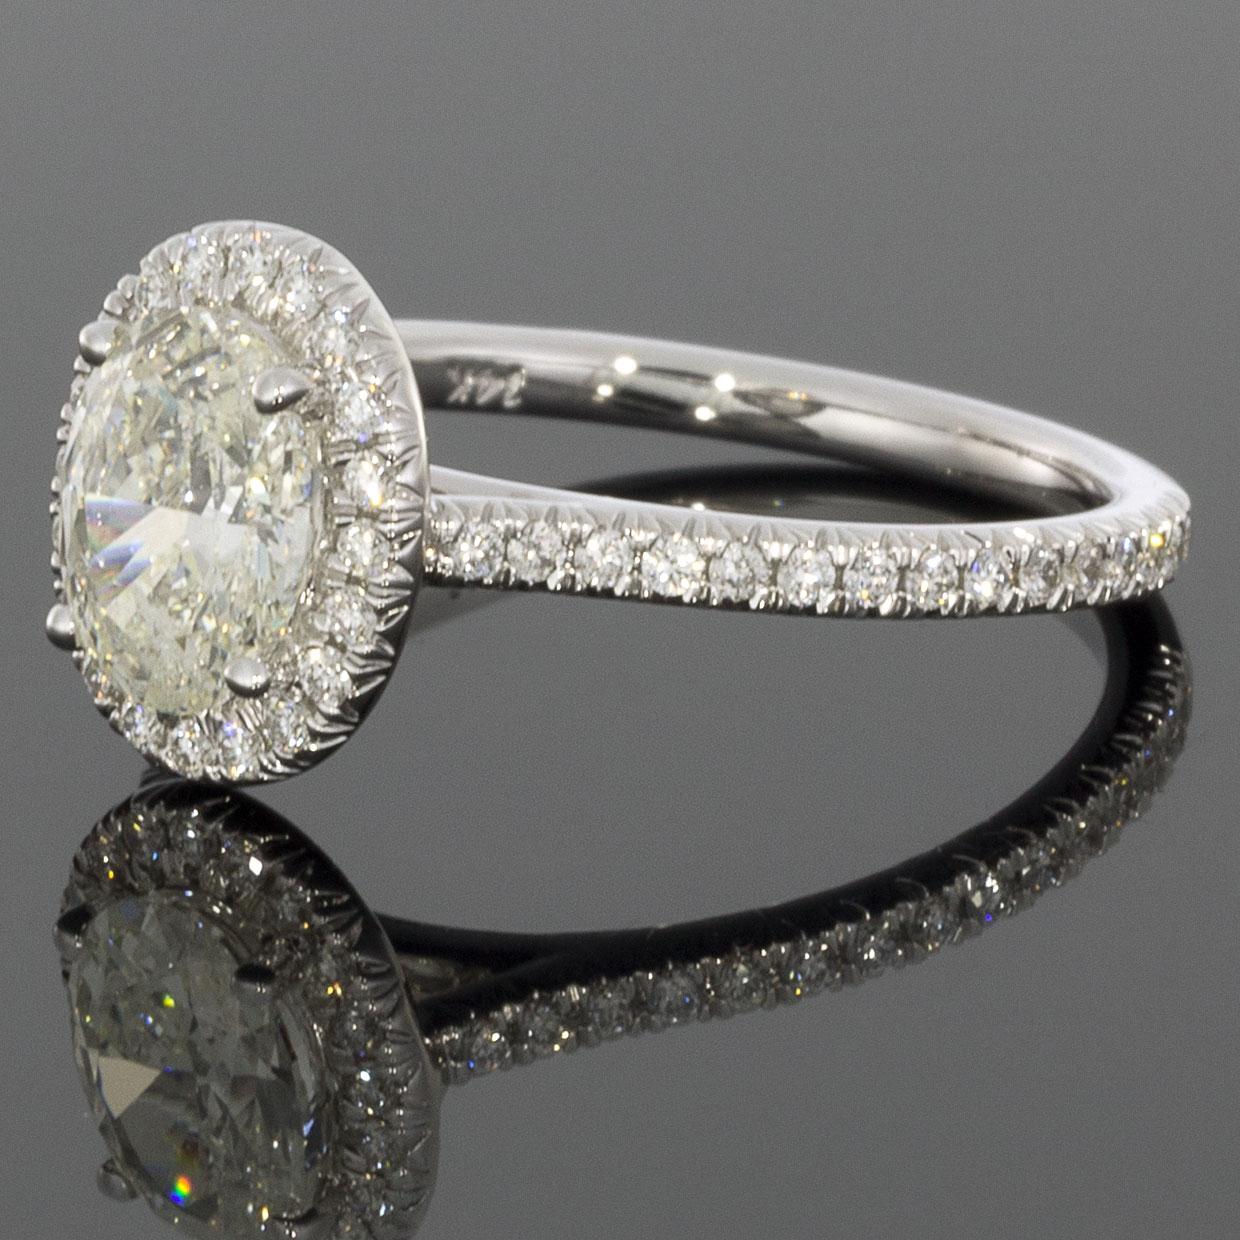 Item Details:
Estimated Retail - $8,000.00
Brand - Martin Flyer
Metal - 14 Karat White Gold
Total Carat Weight (TCW) - 1.31 ctw
Certification/Grading - Yes (GIA)
Style - Halo Engagement Ring
Ring Size - 6.50
Sizable - Yes
Width - 1.80 mm

Stone 1